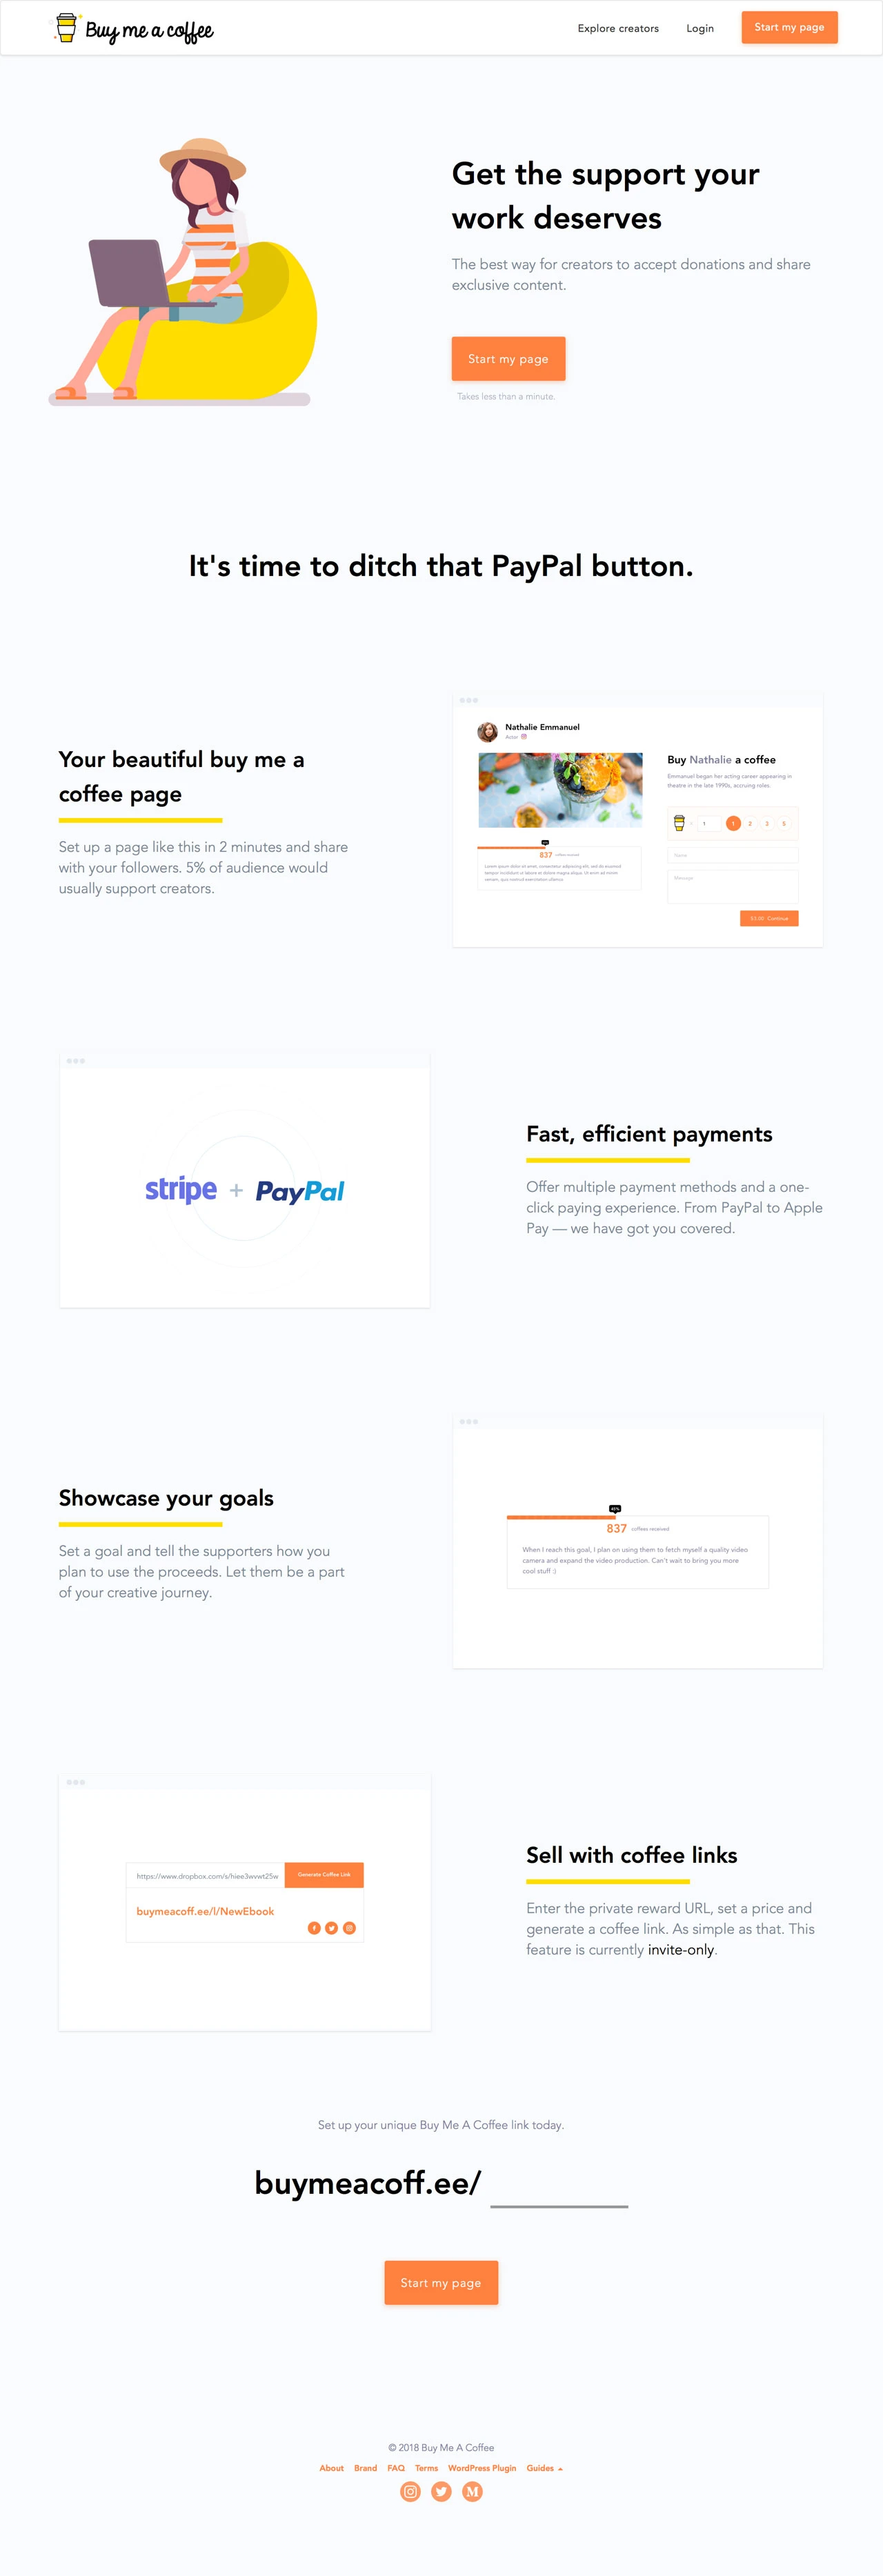 Buy Me A Coffee Landing Page Example: The best way for creators to accept donations and share exclusive content.